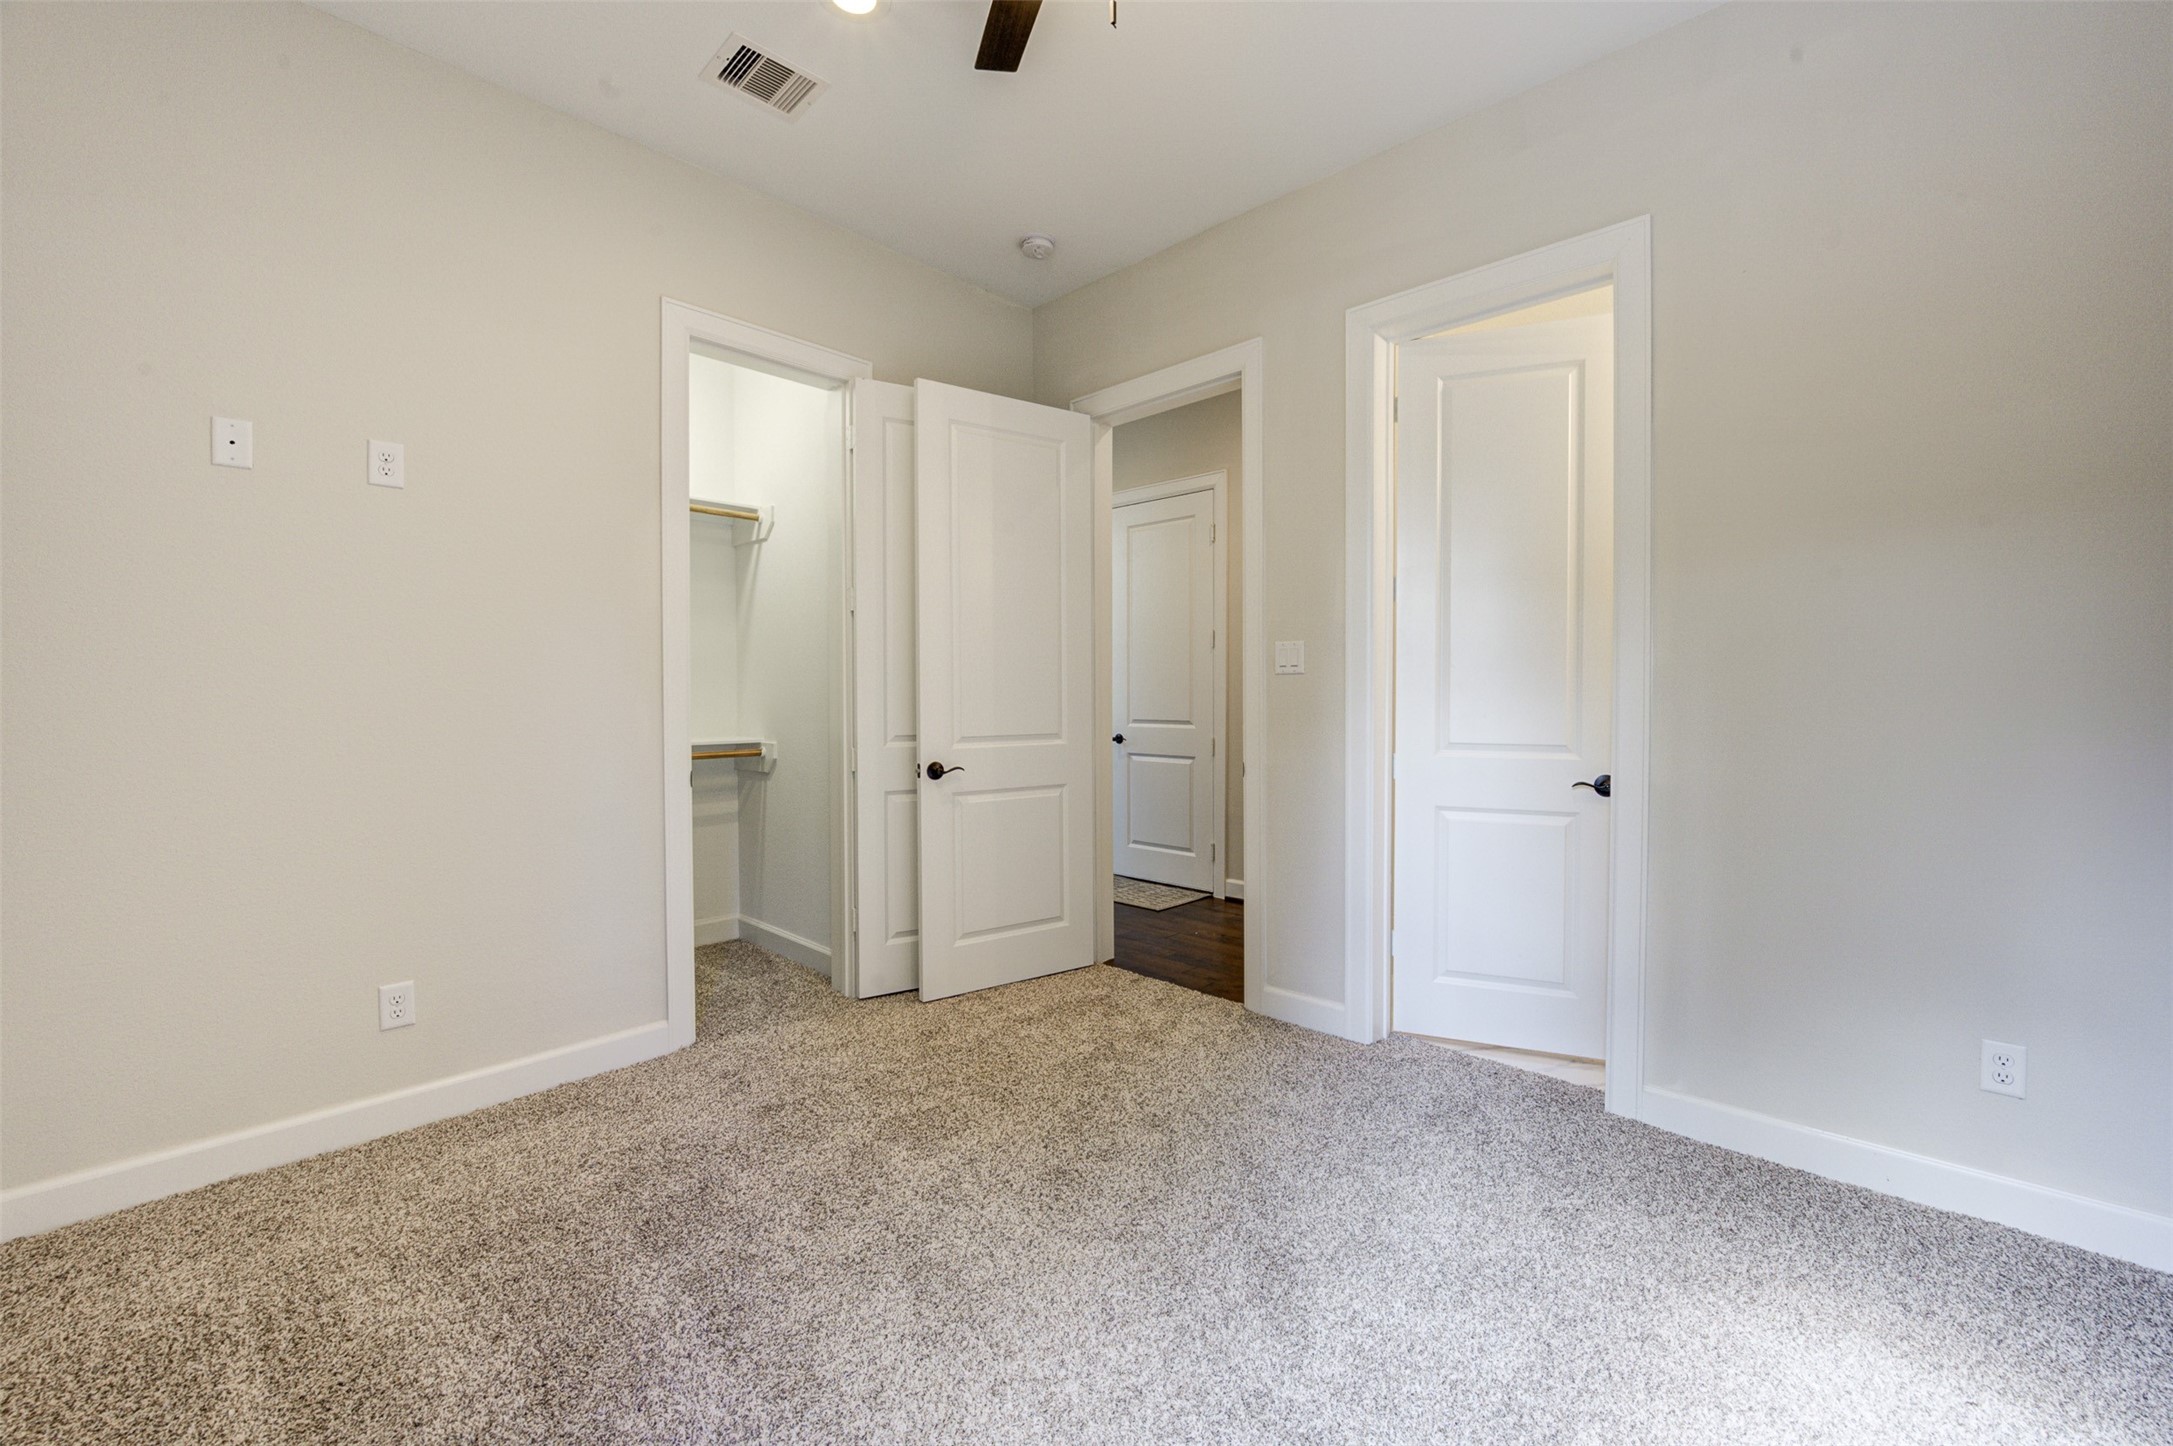 1st. Bedroom located on the first floor that can be used as a guest room or an office.